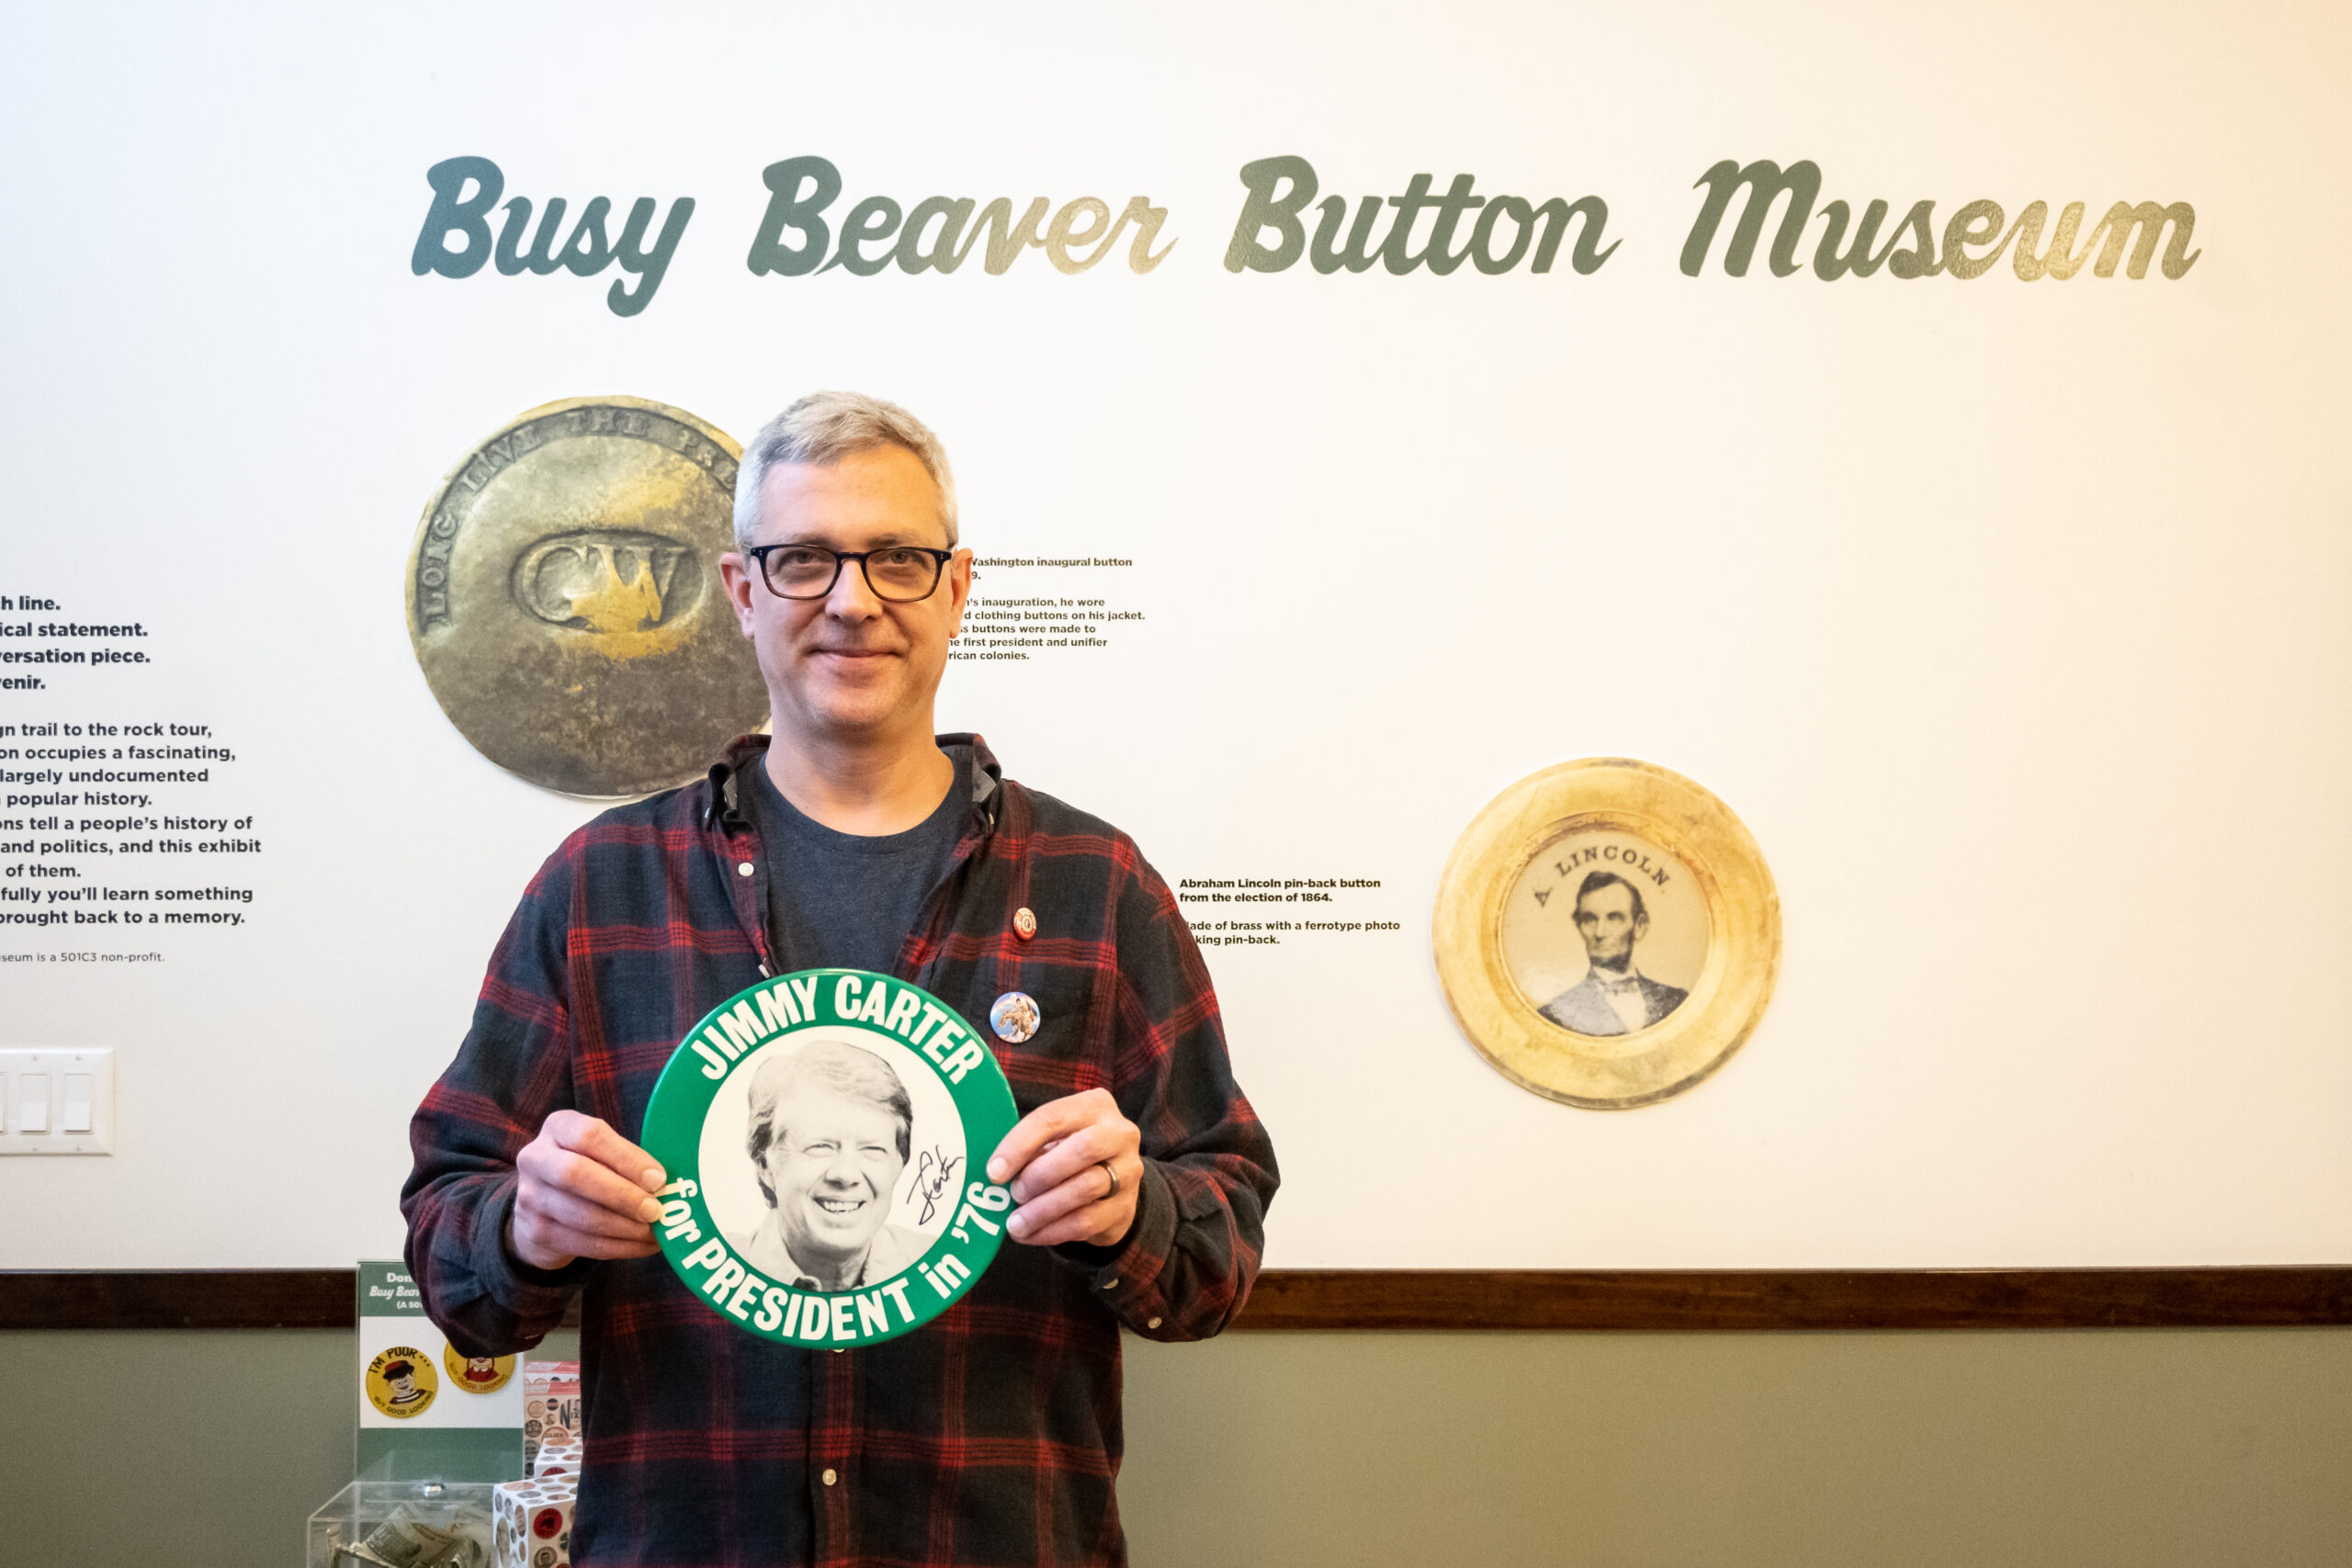 Co-Owner Joel Carter smiles, holding a plate-sized button with Jimmy Carter’s face on it and the inscription “Jimmy Carter for President in ‘76.” On the wall behind him it reads “Busy Beaver Button Museum.”